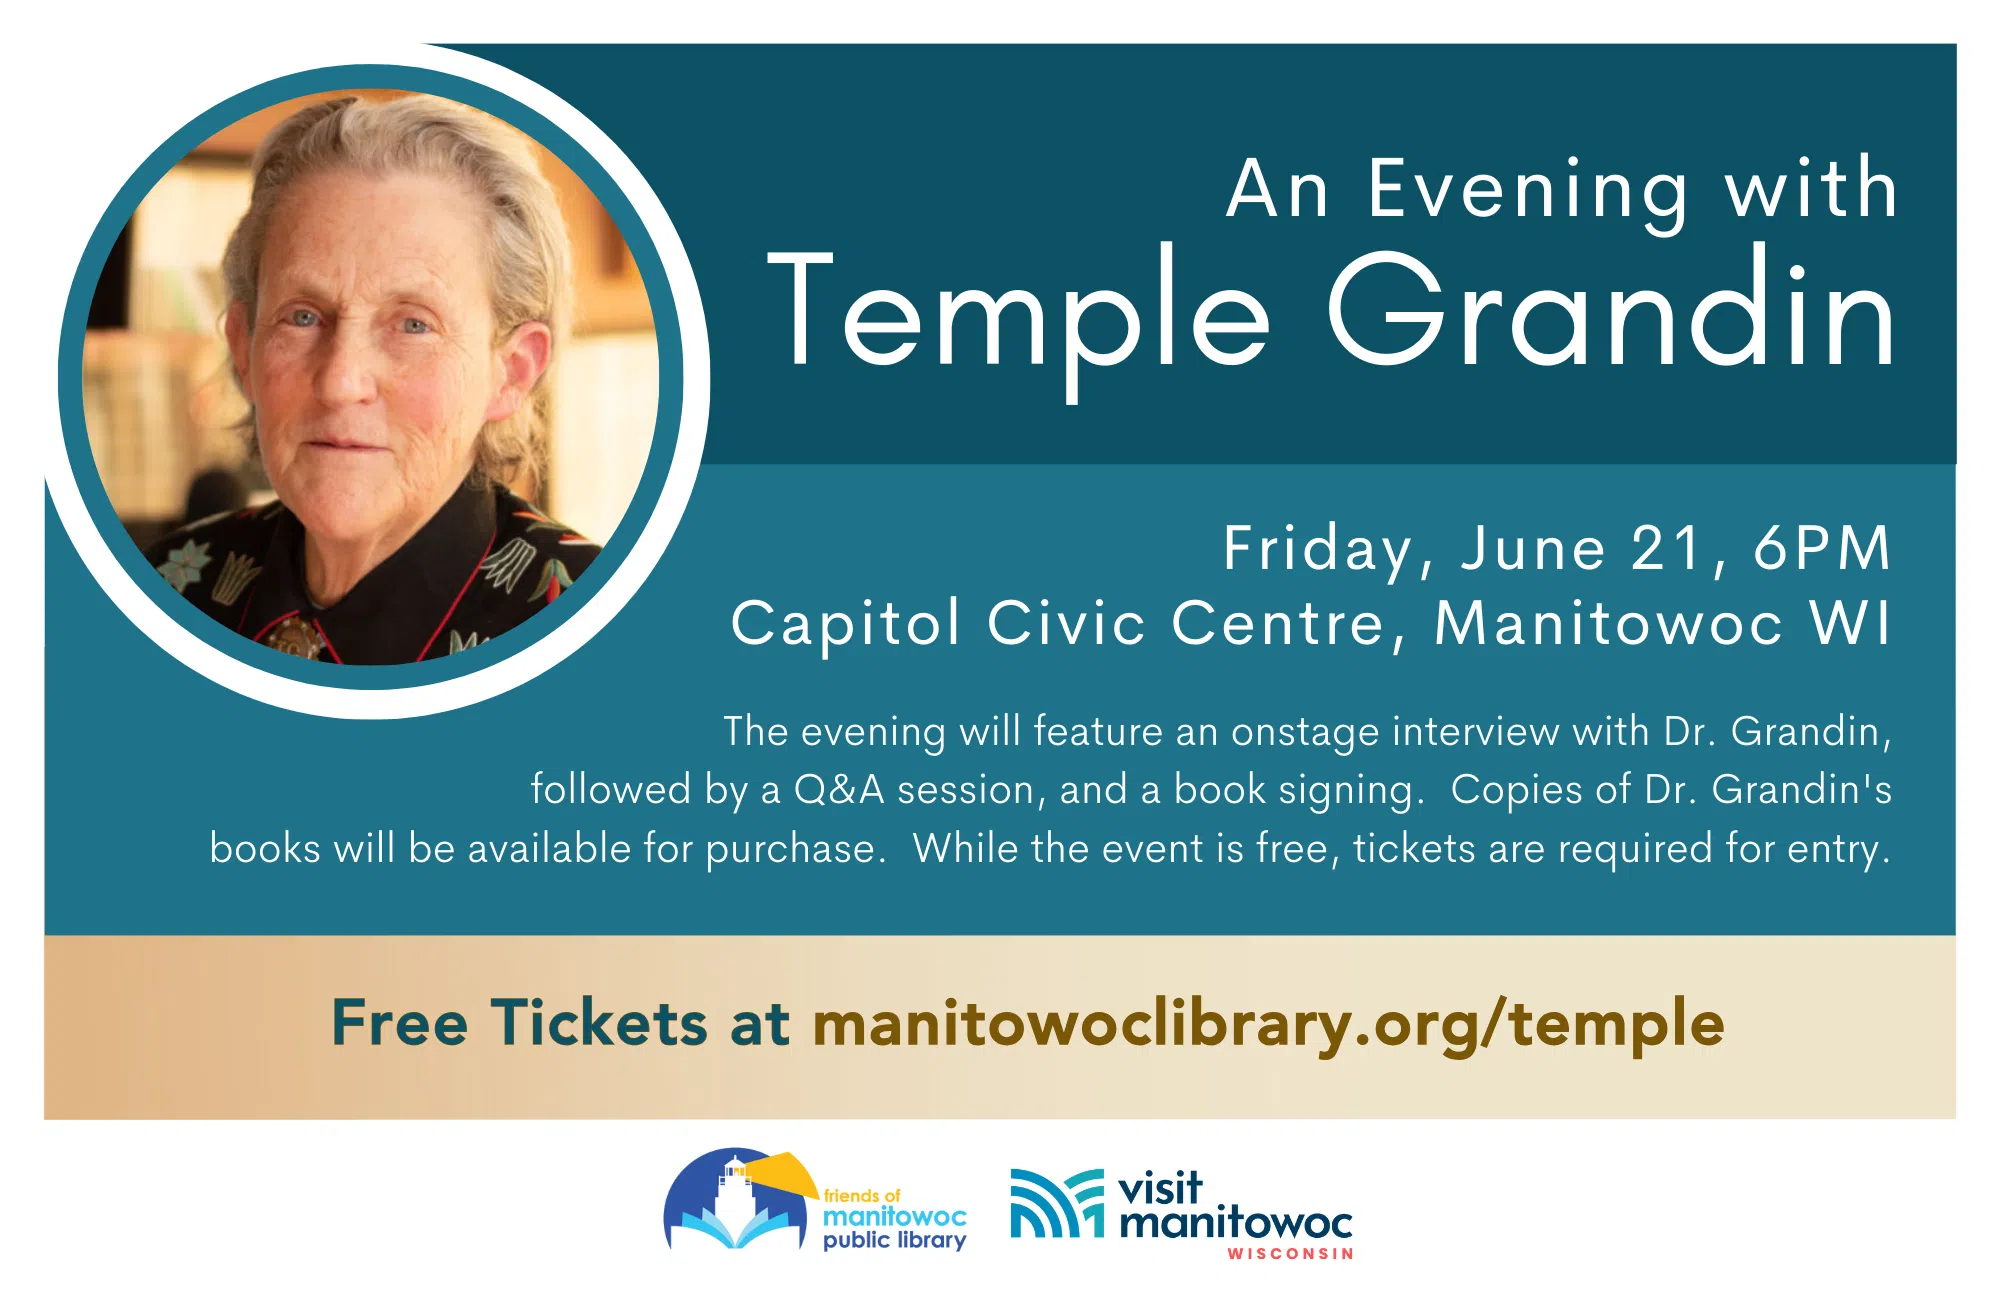 Manitowoc Public Library Invites you to Create New Memories During "An Evening with Temple Grandin"